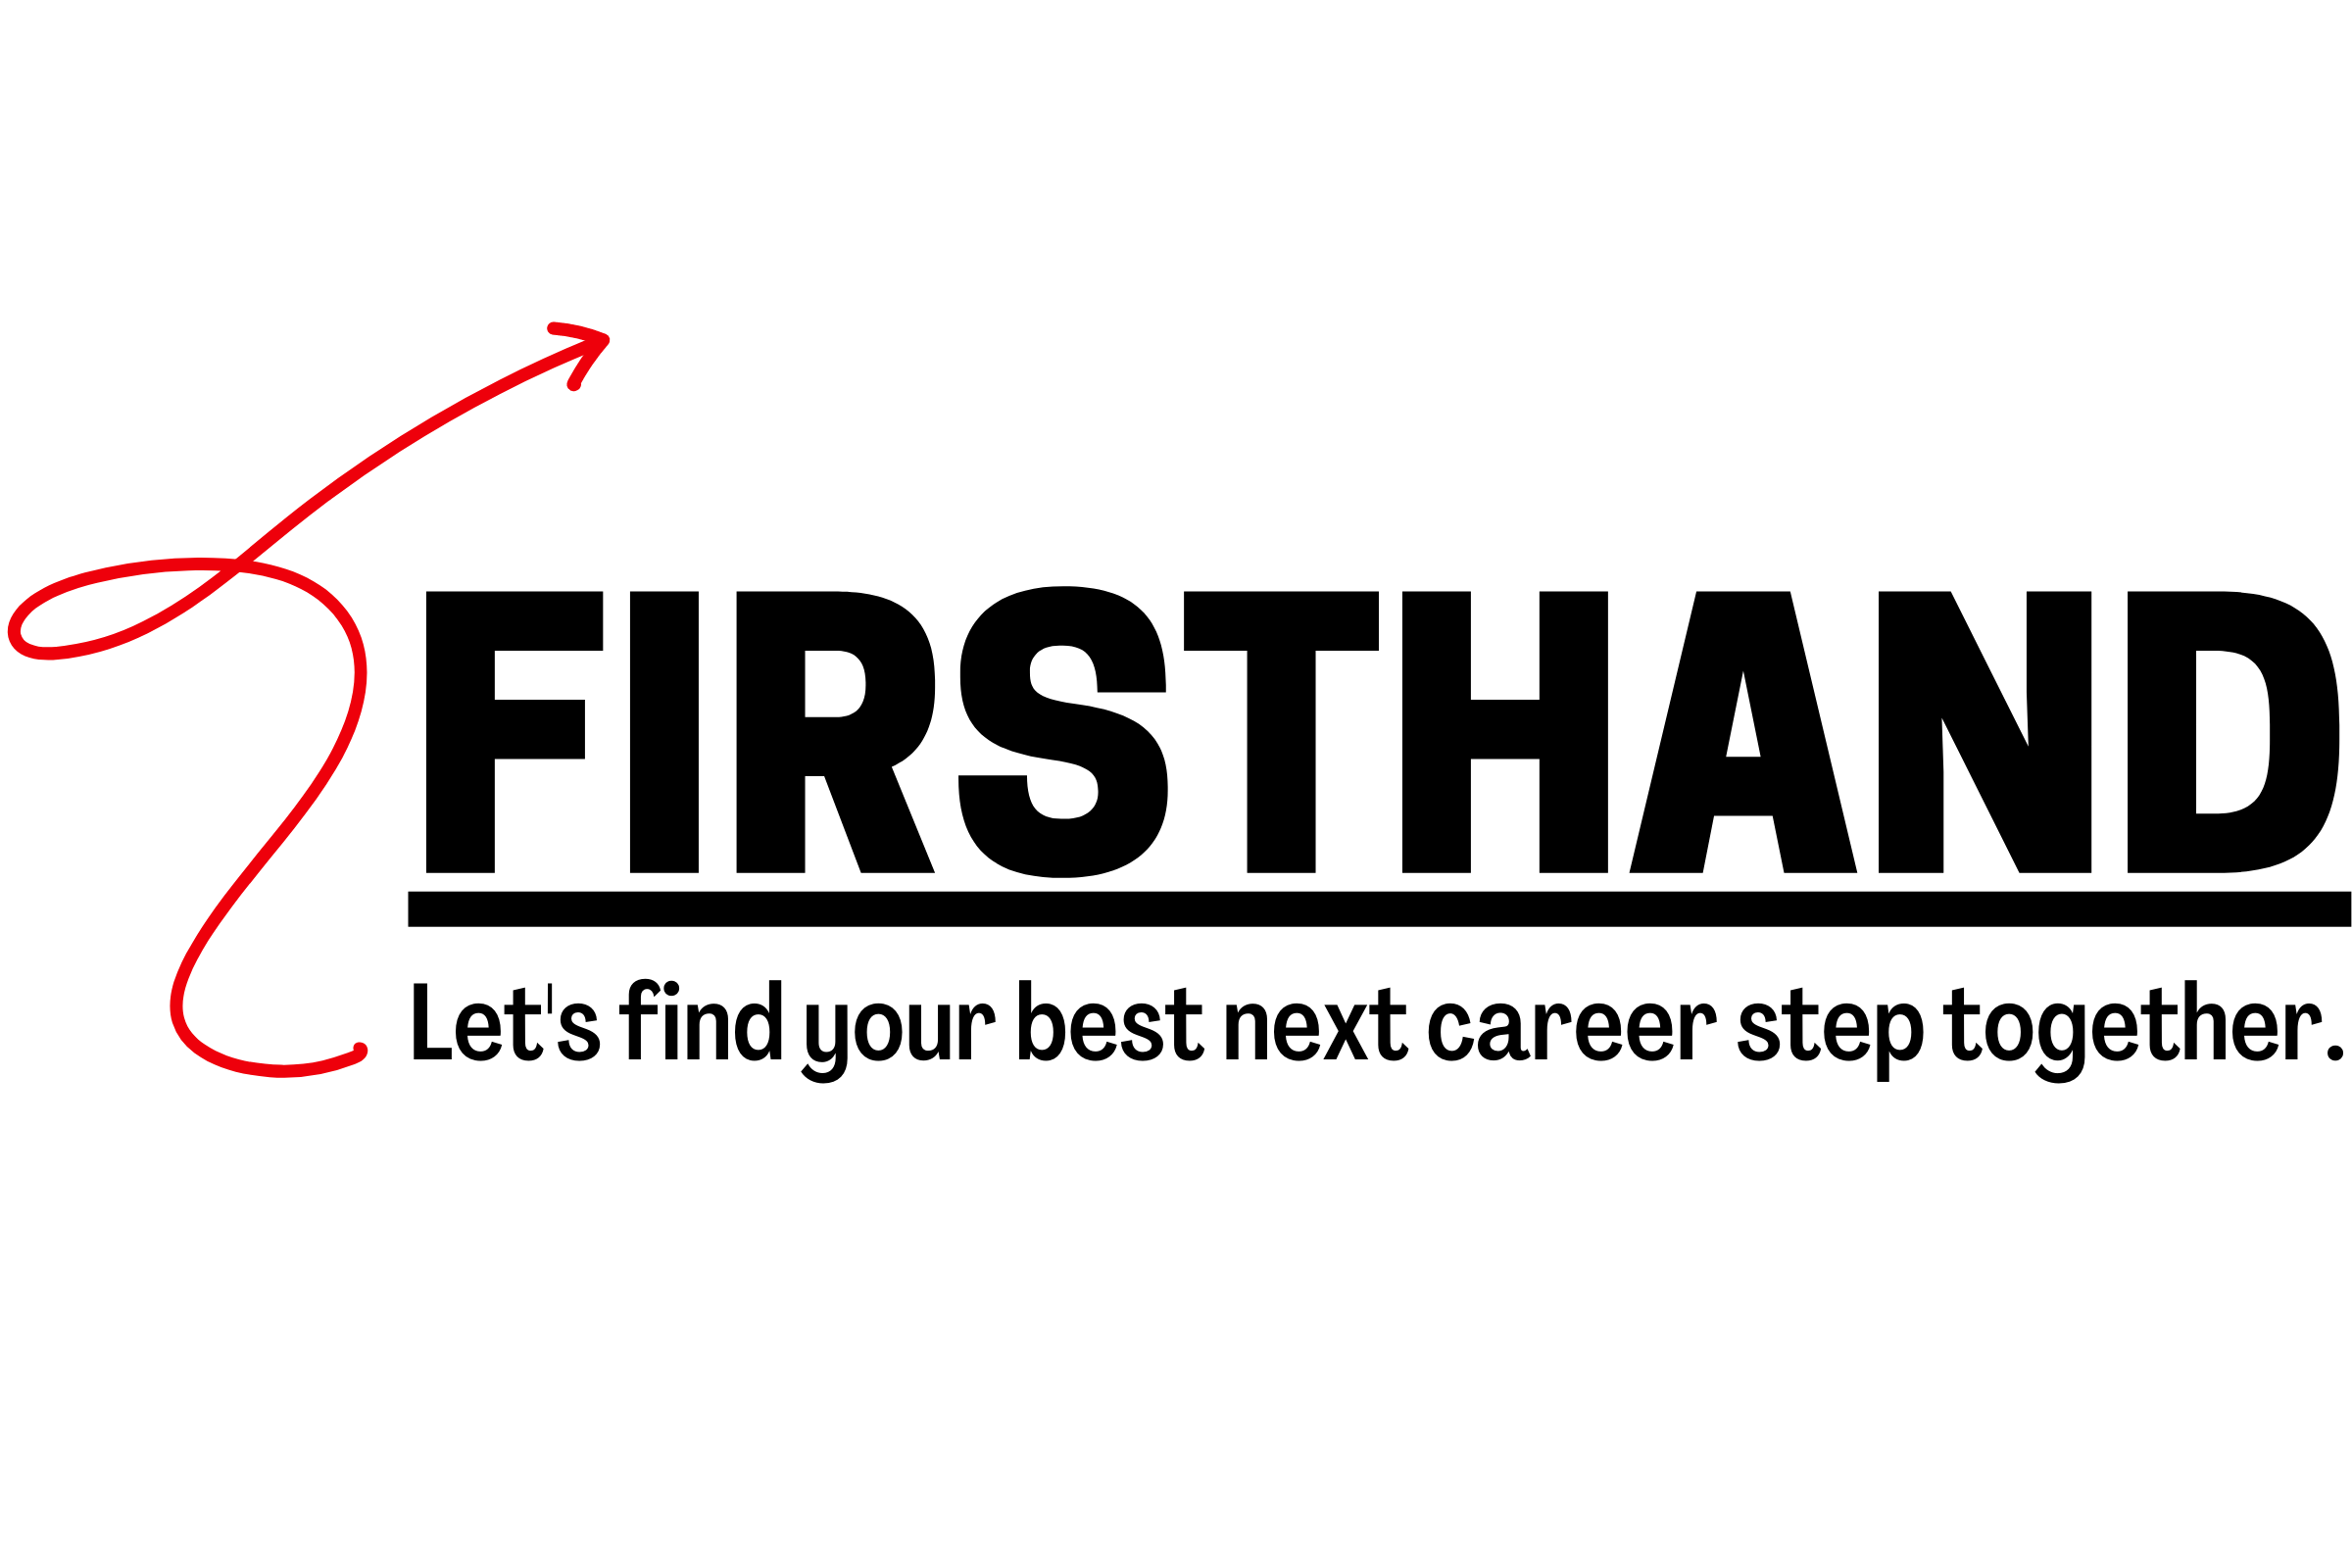 Firsthand: Let's find your best next career step together